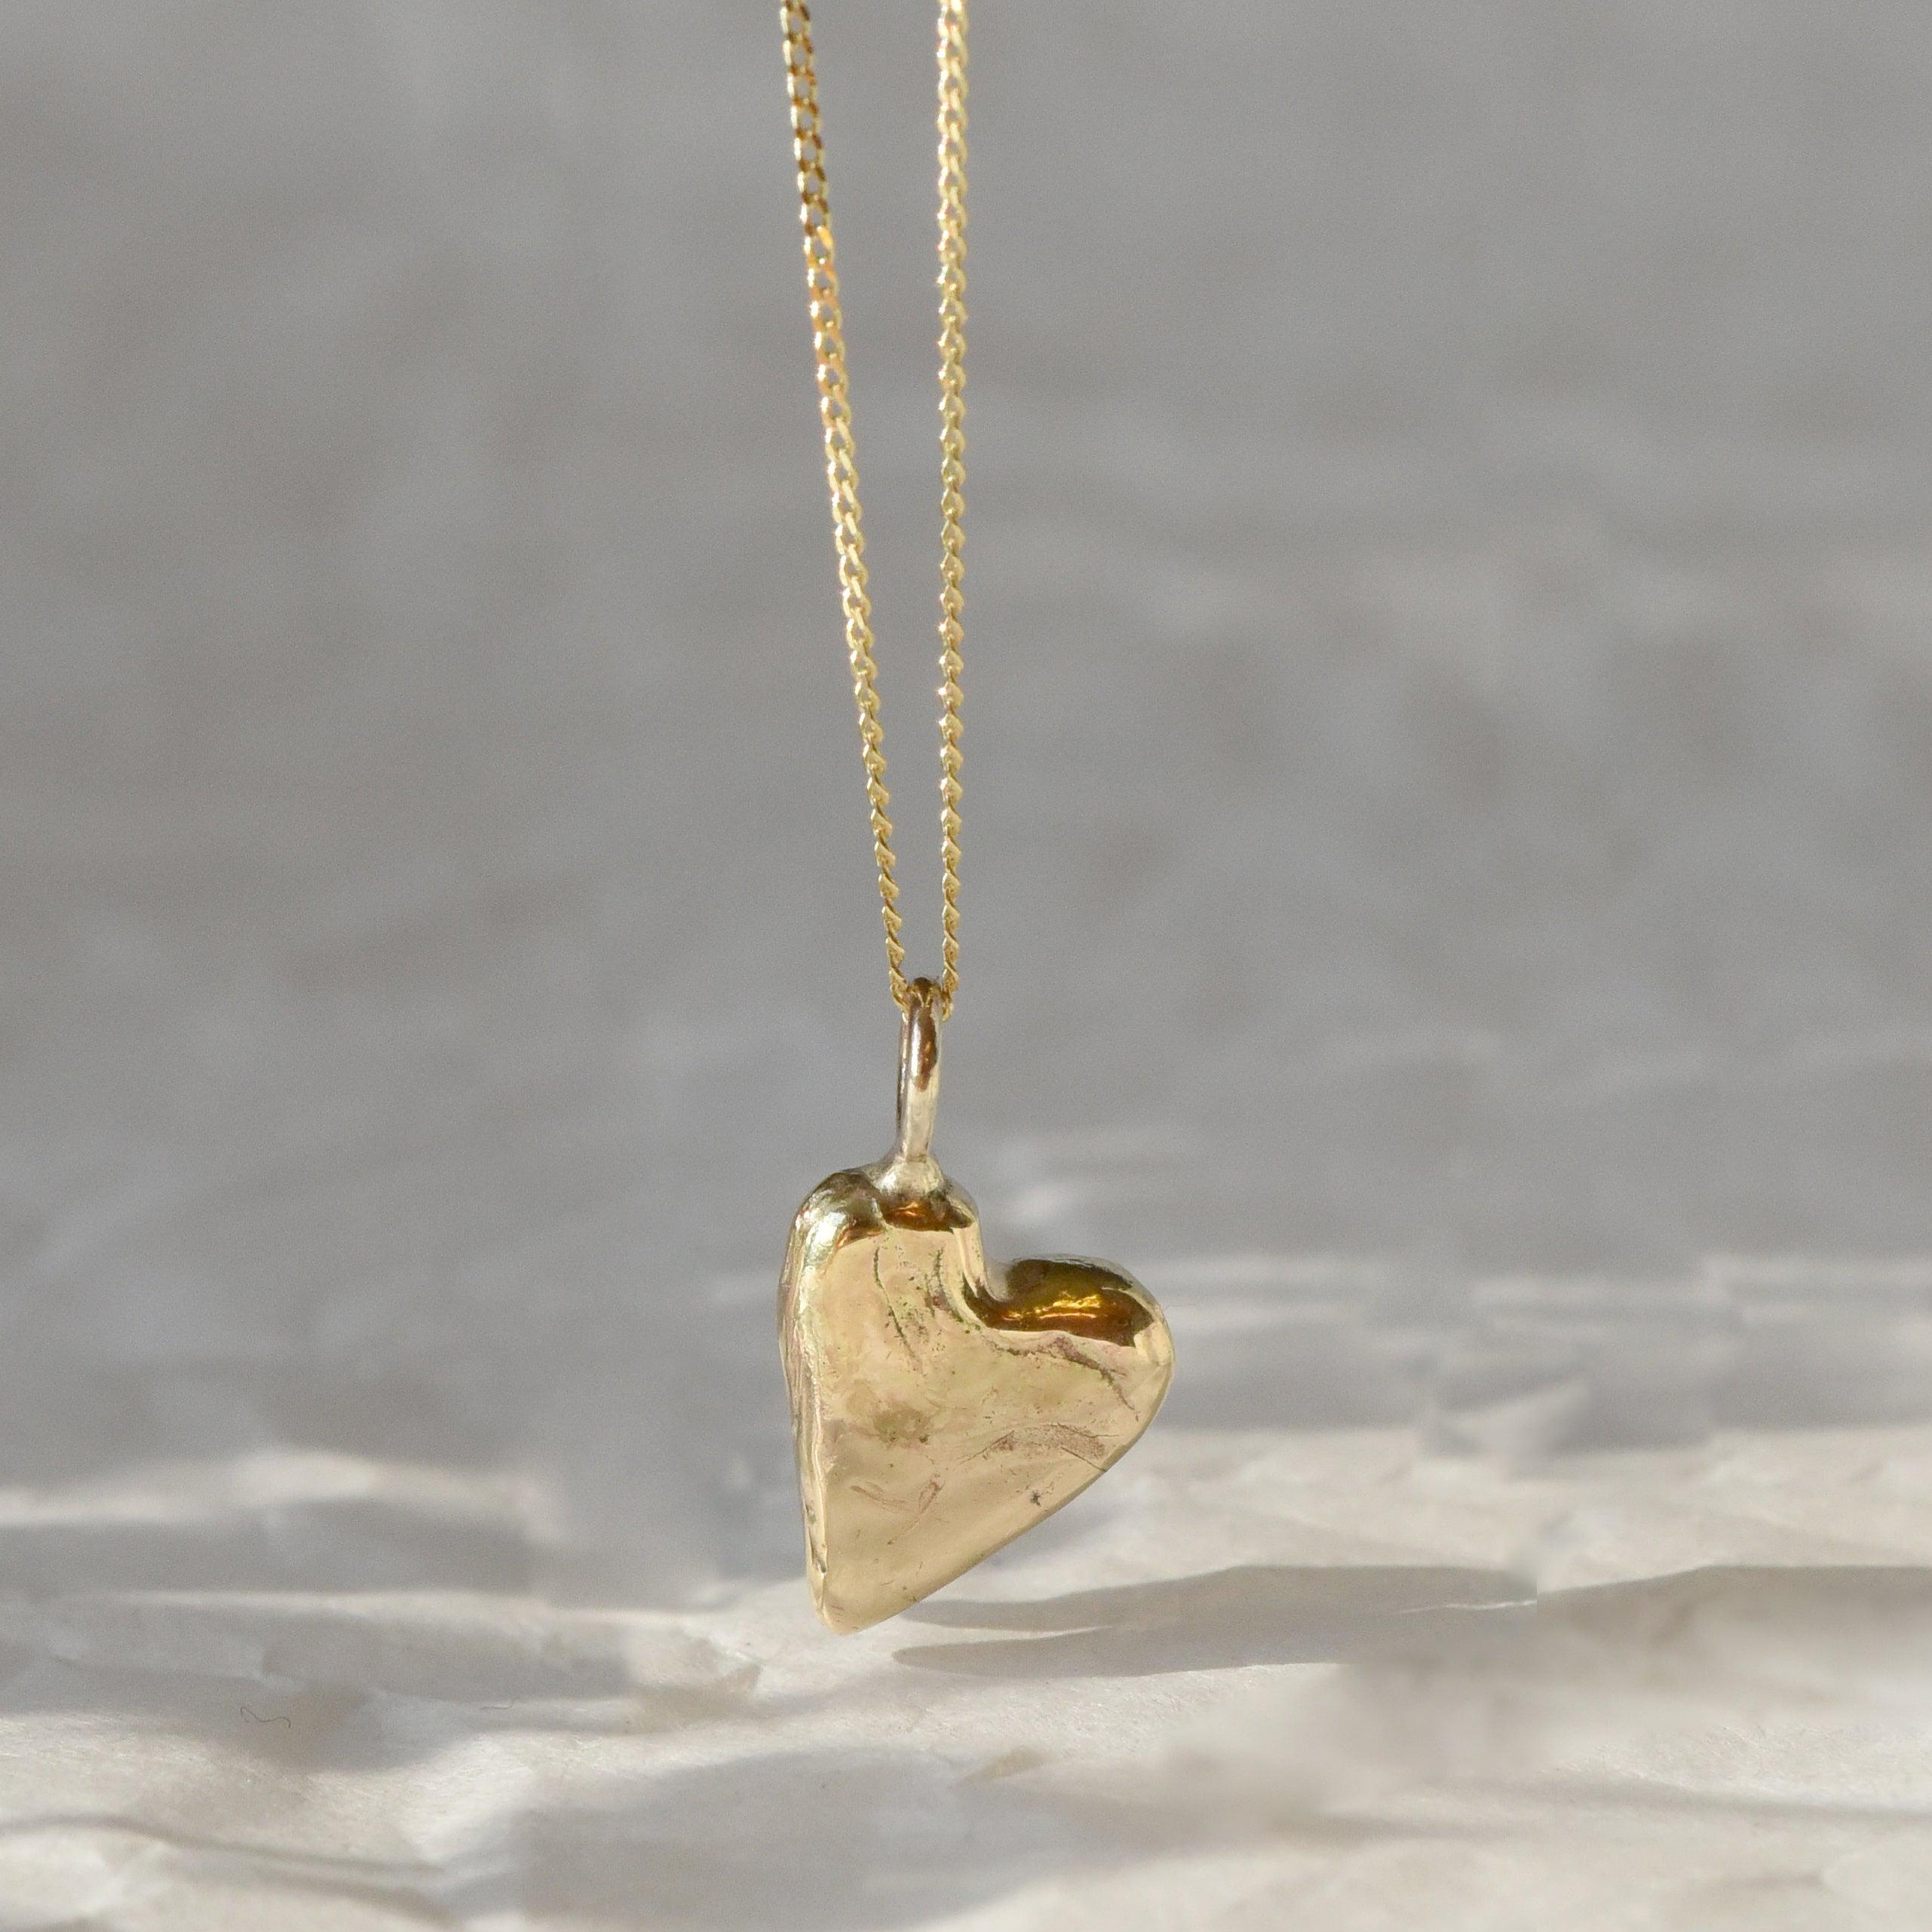 9ct Gold Personalised Handformed Heart Pendant Necklace